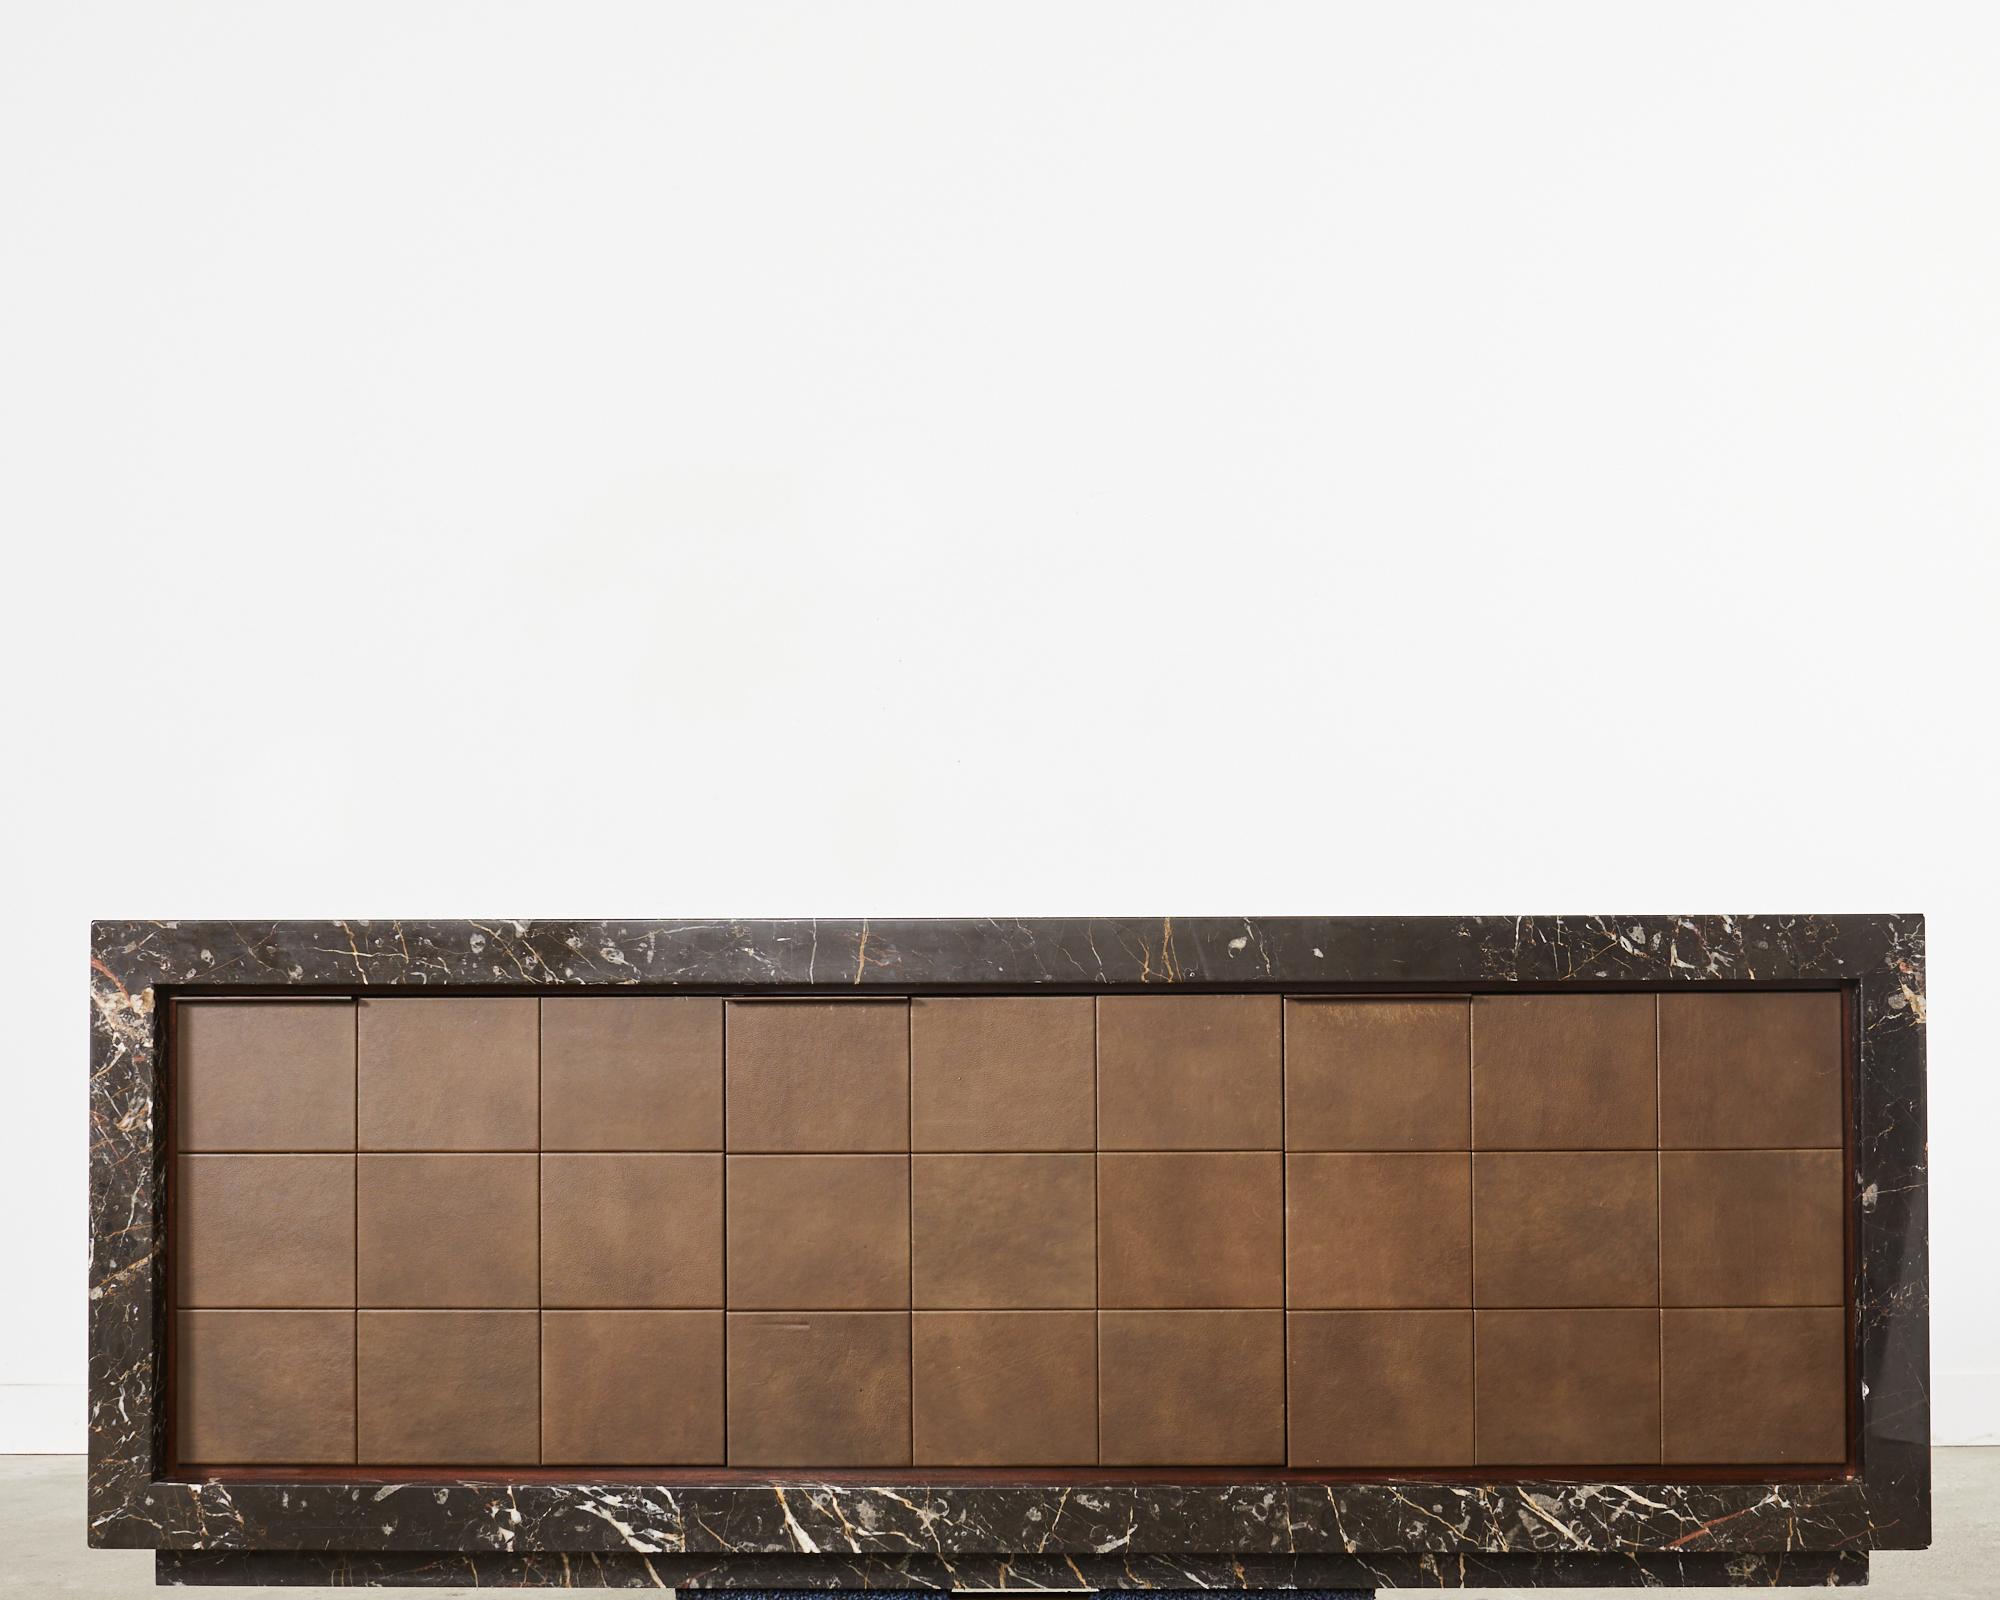 Bespoke monumental sideboard or credenza crafted from black marble appearing as a solid block case. The imposing credenza is incredibly heavy and solid weighing an estimated 800 pounds. Finished on all sides fronted by geometric leather clad